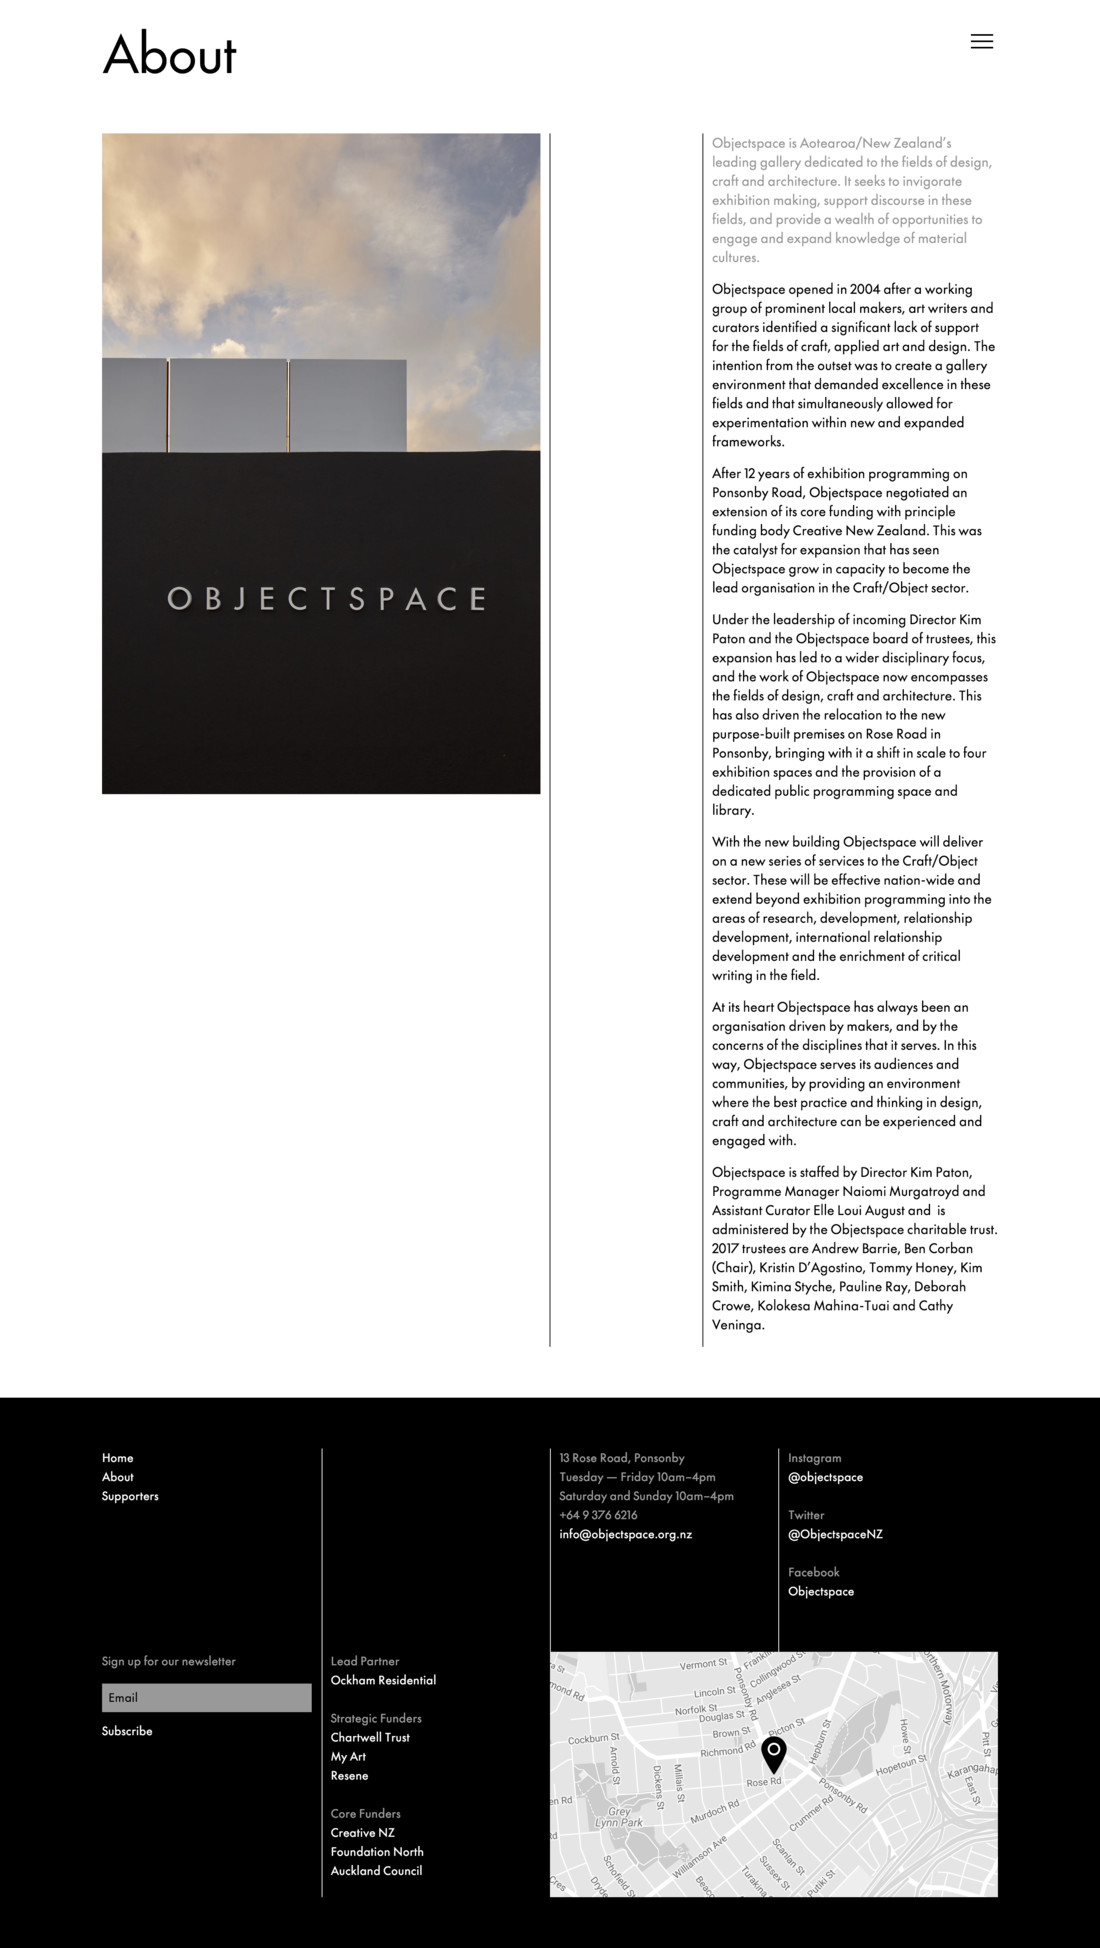 Detail image for Objectspace